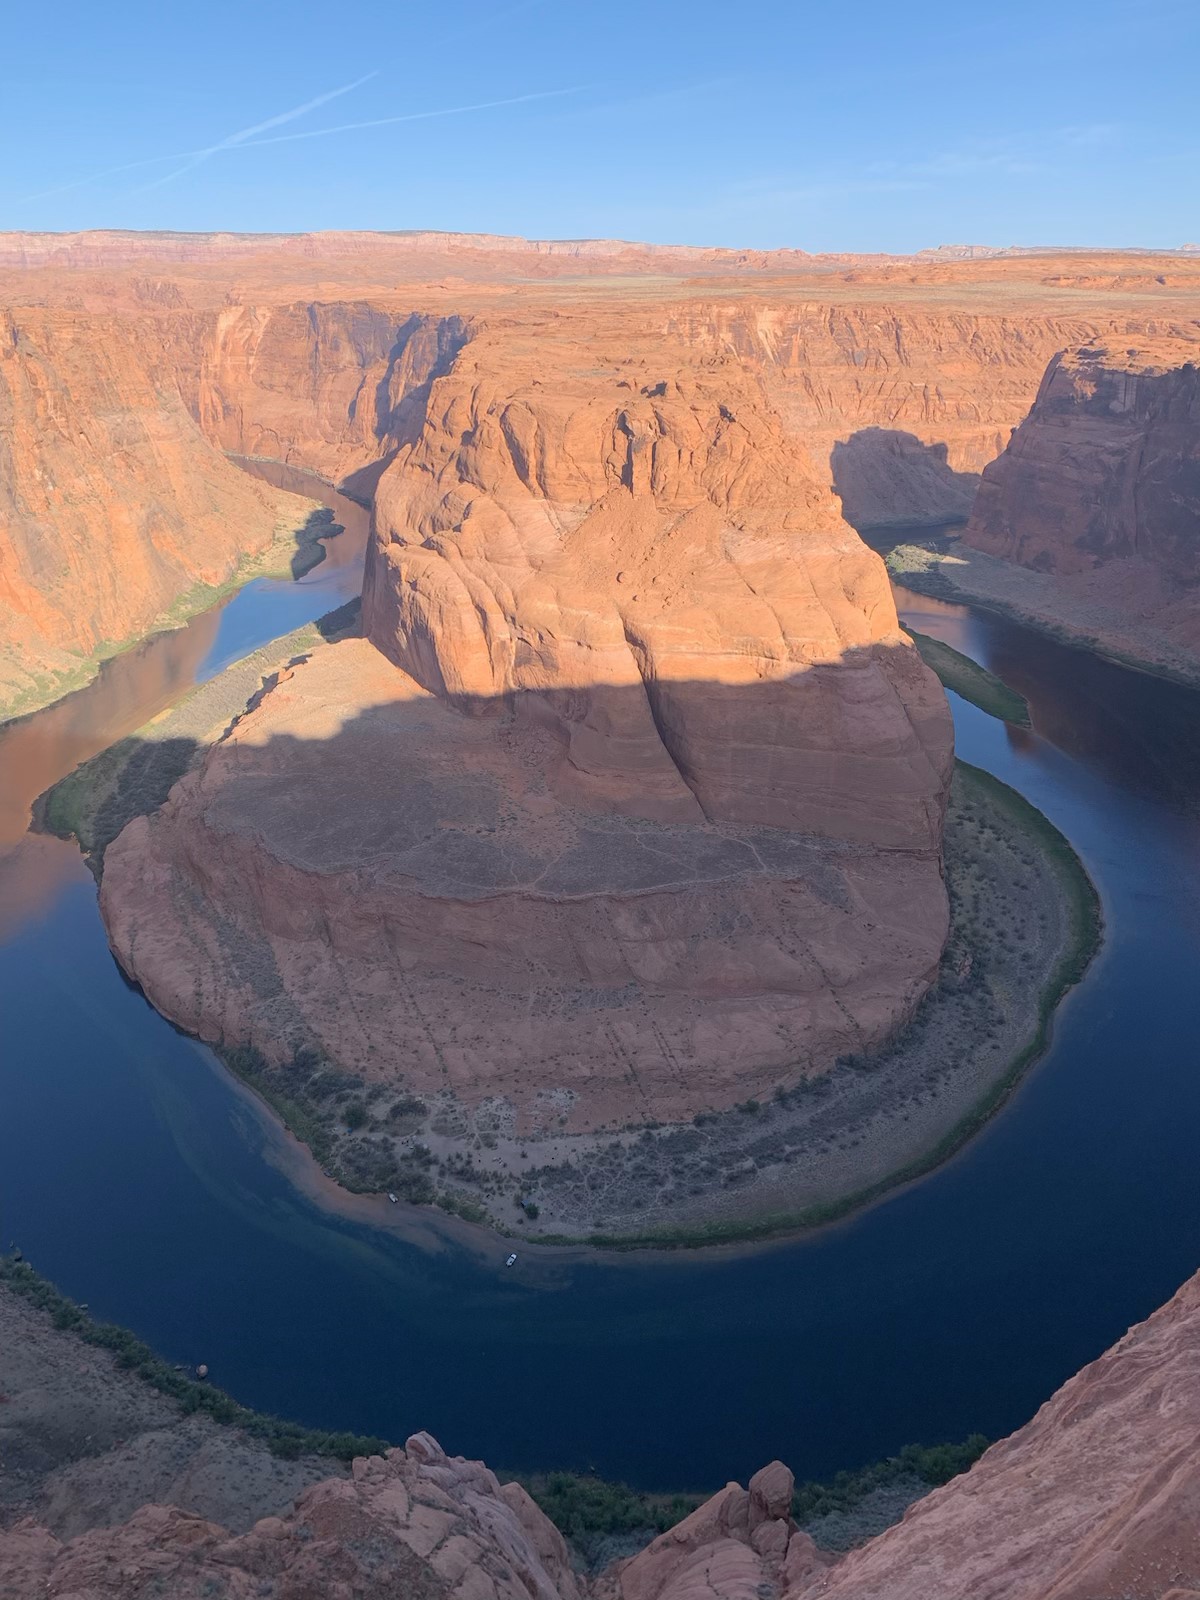 Full time travel family visiting Horseshoe Bend in Page, Arizona